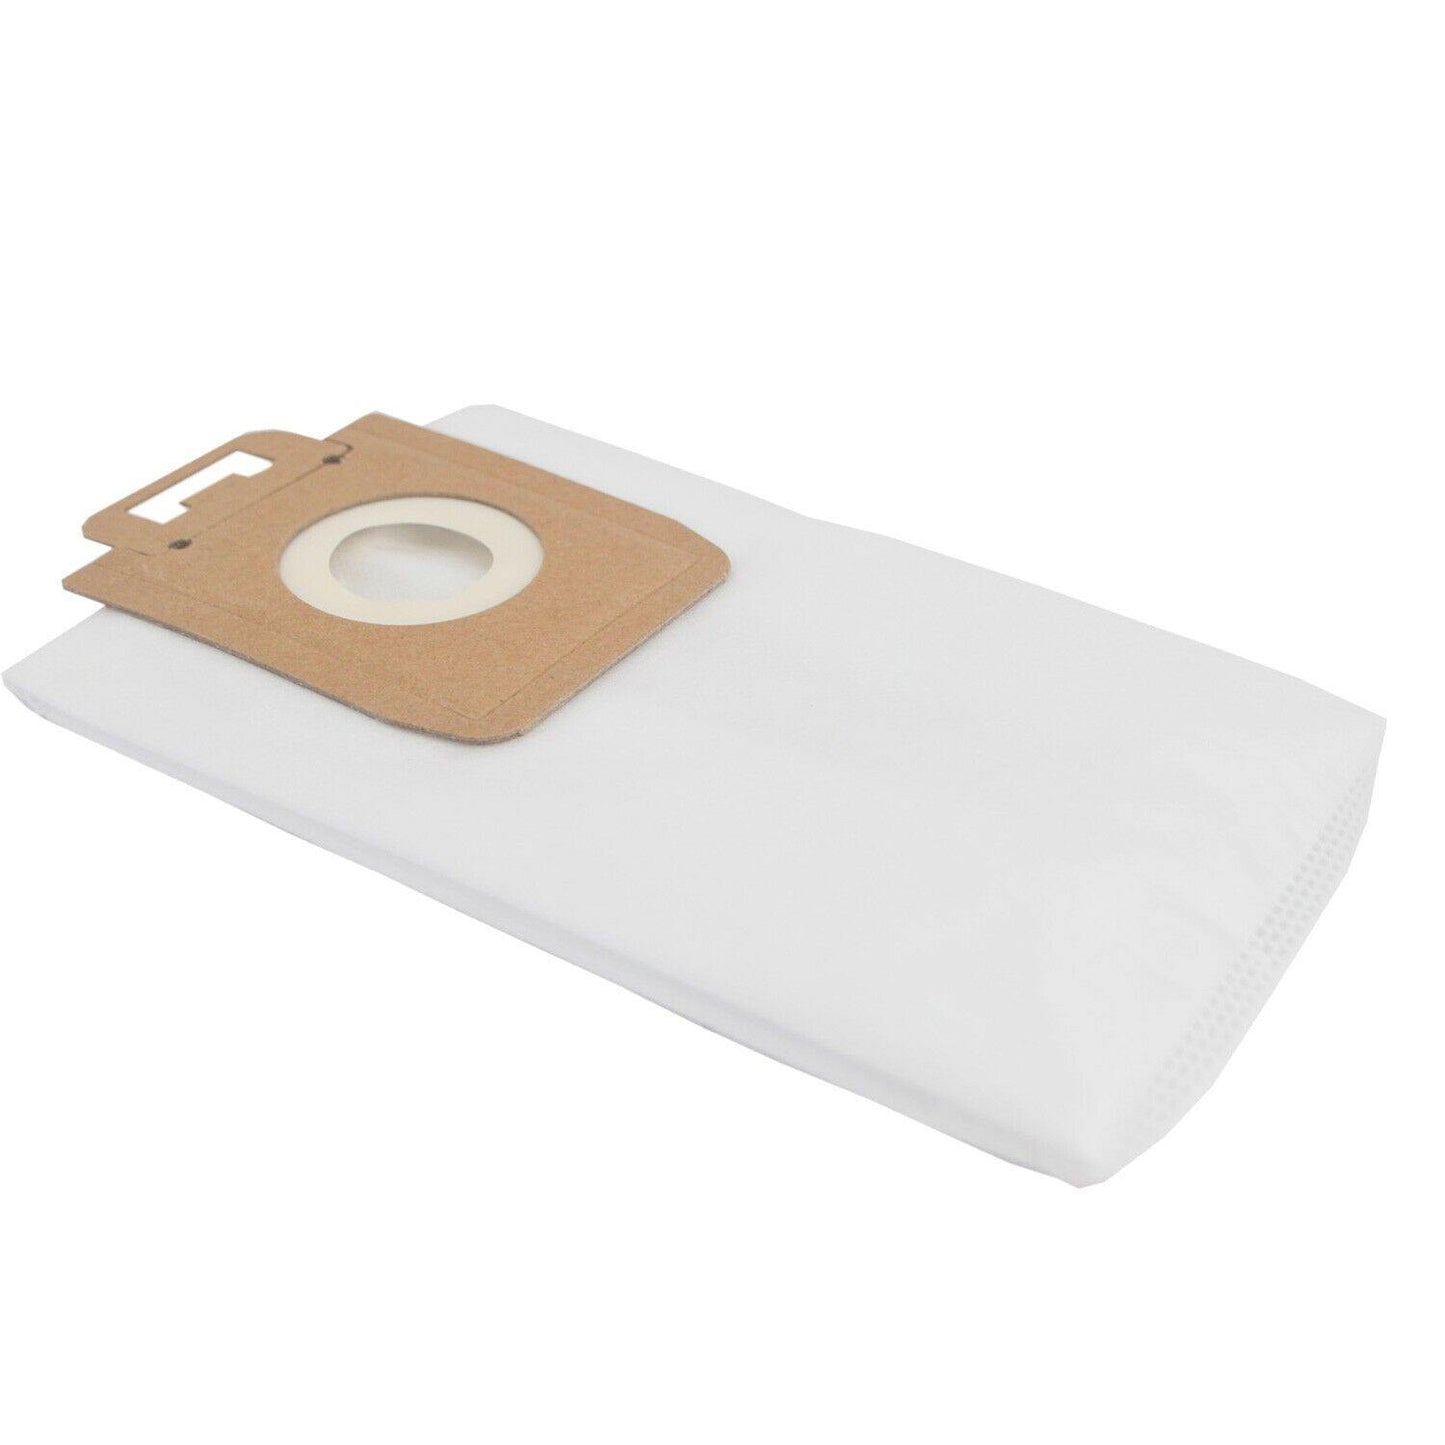 12X Synthetic Dust Bags For Nilfisk Vacuum Cleaner Power Select Series 107407639 Sparesbarn